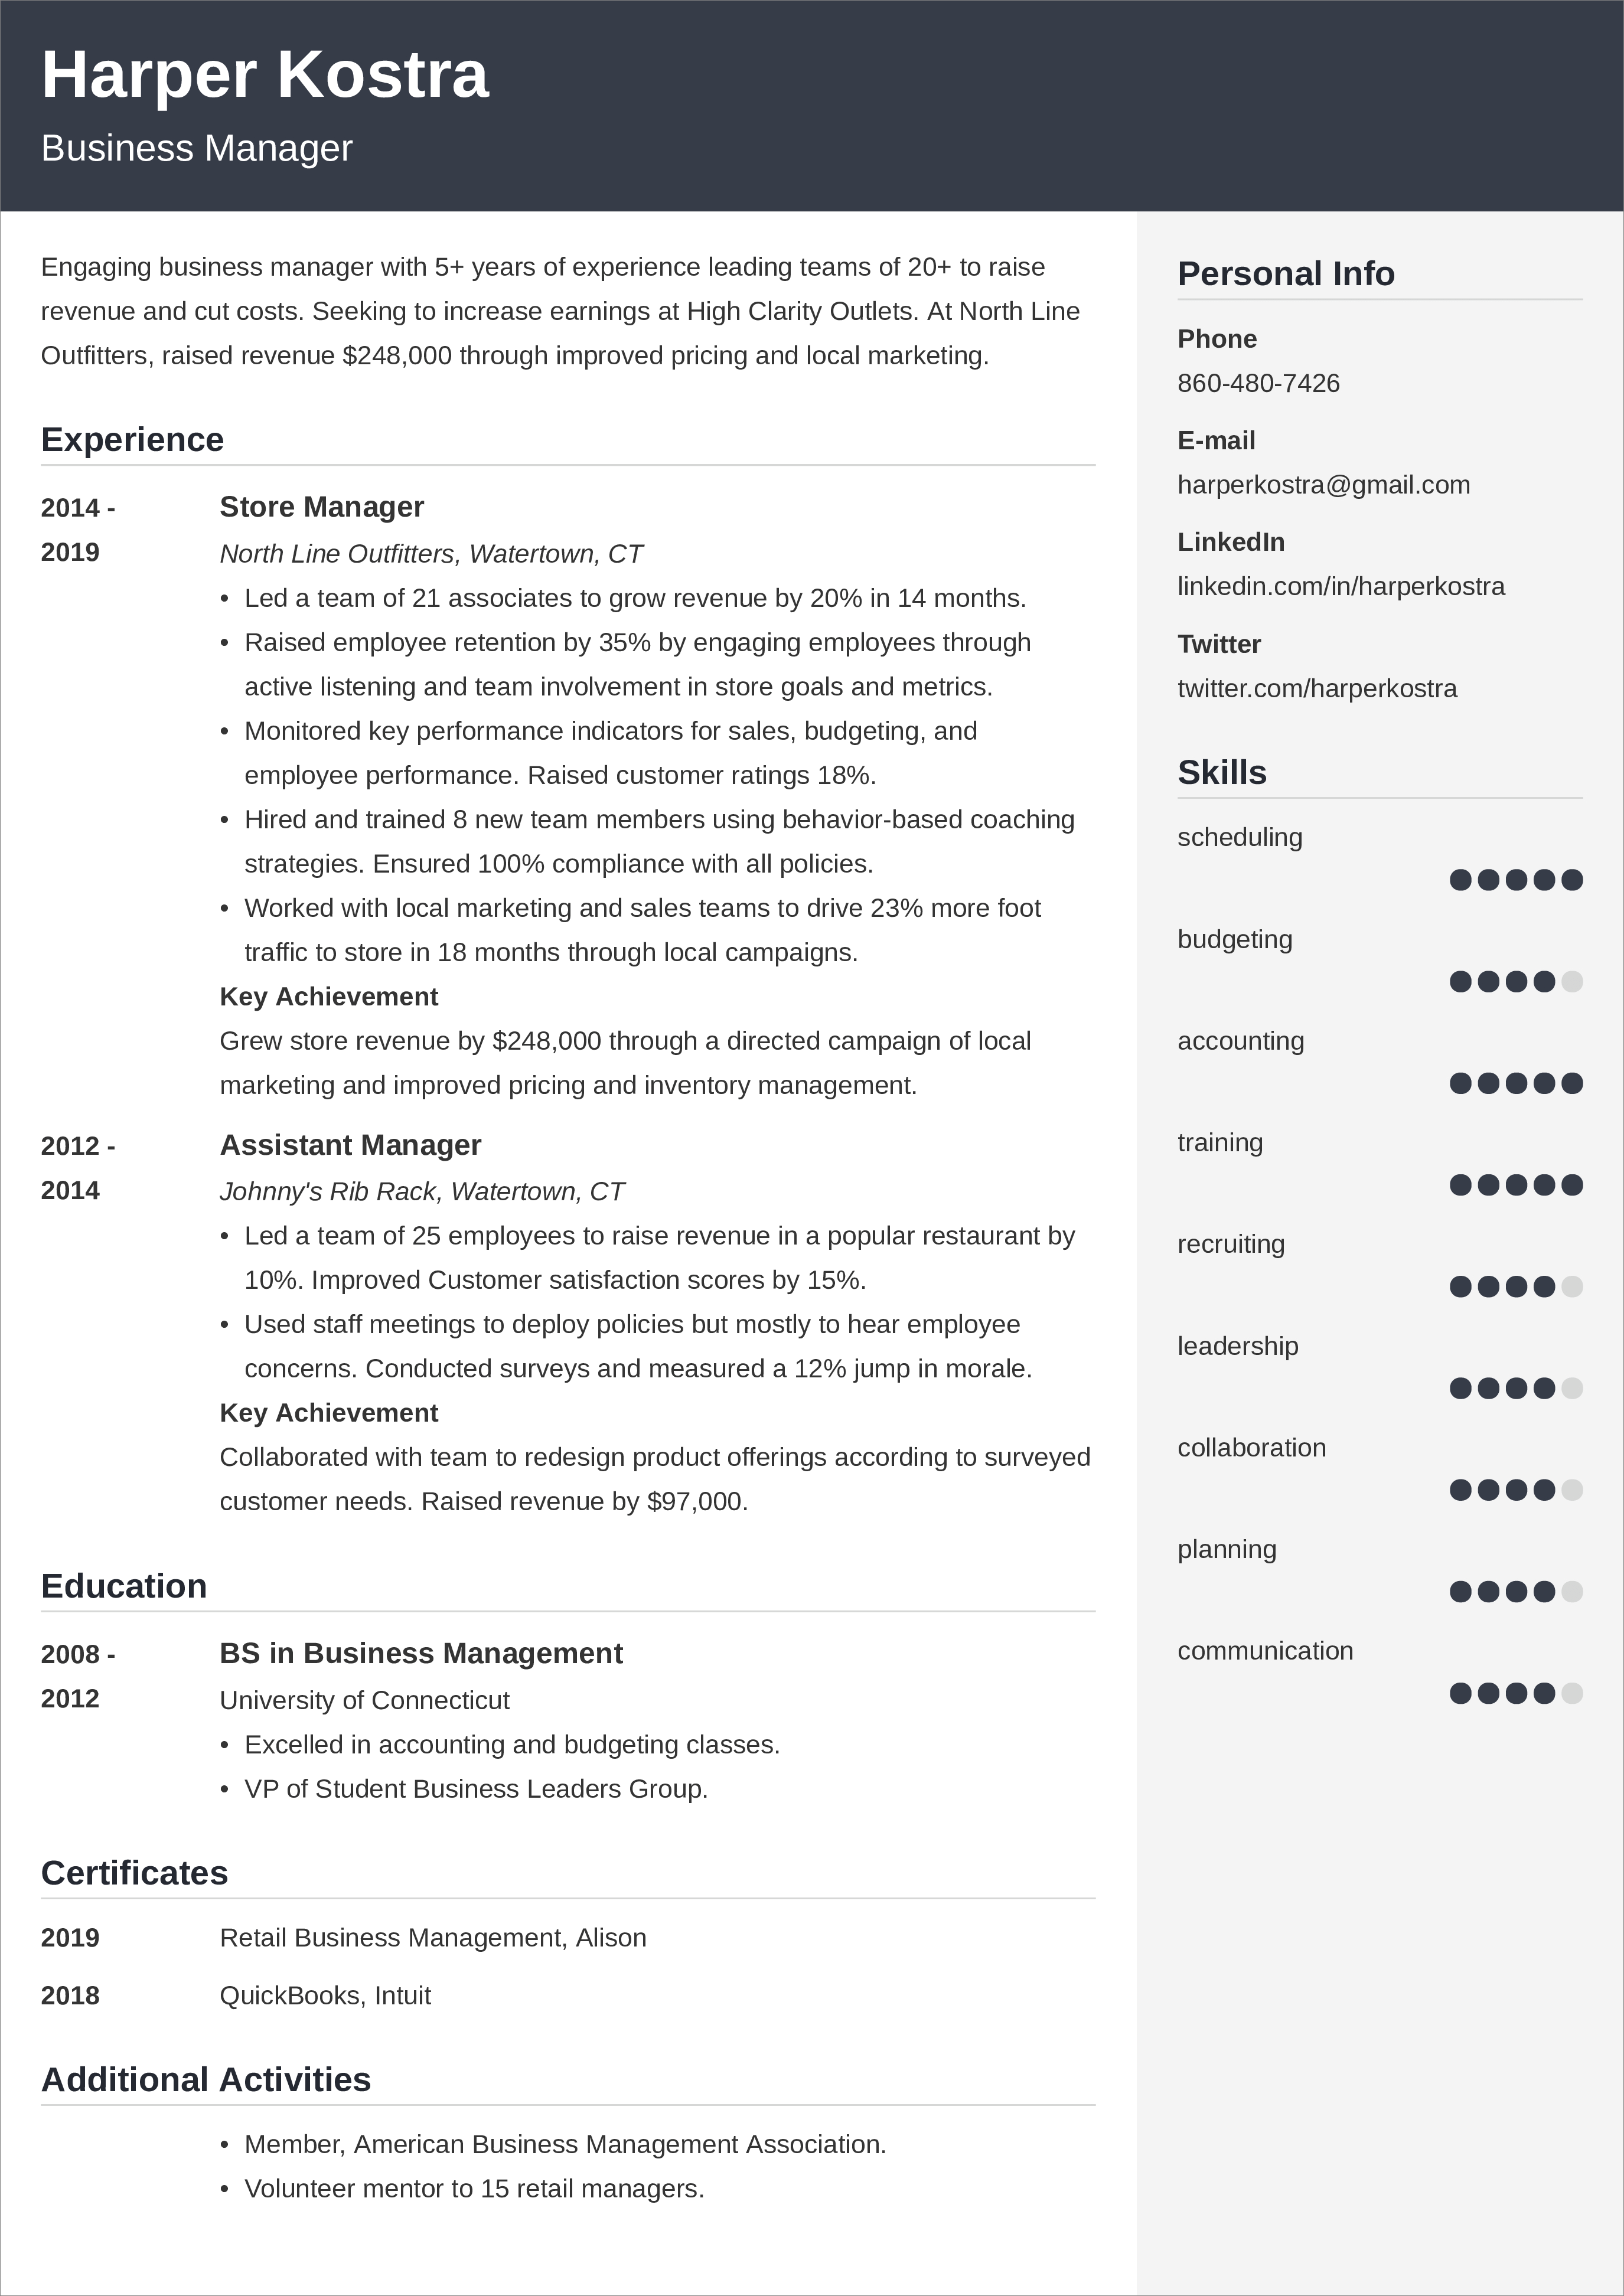 relevant coursework for business management resume